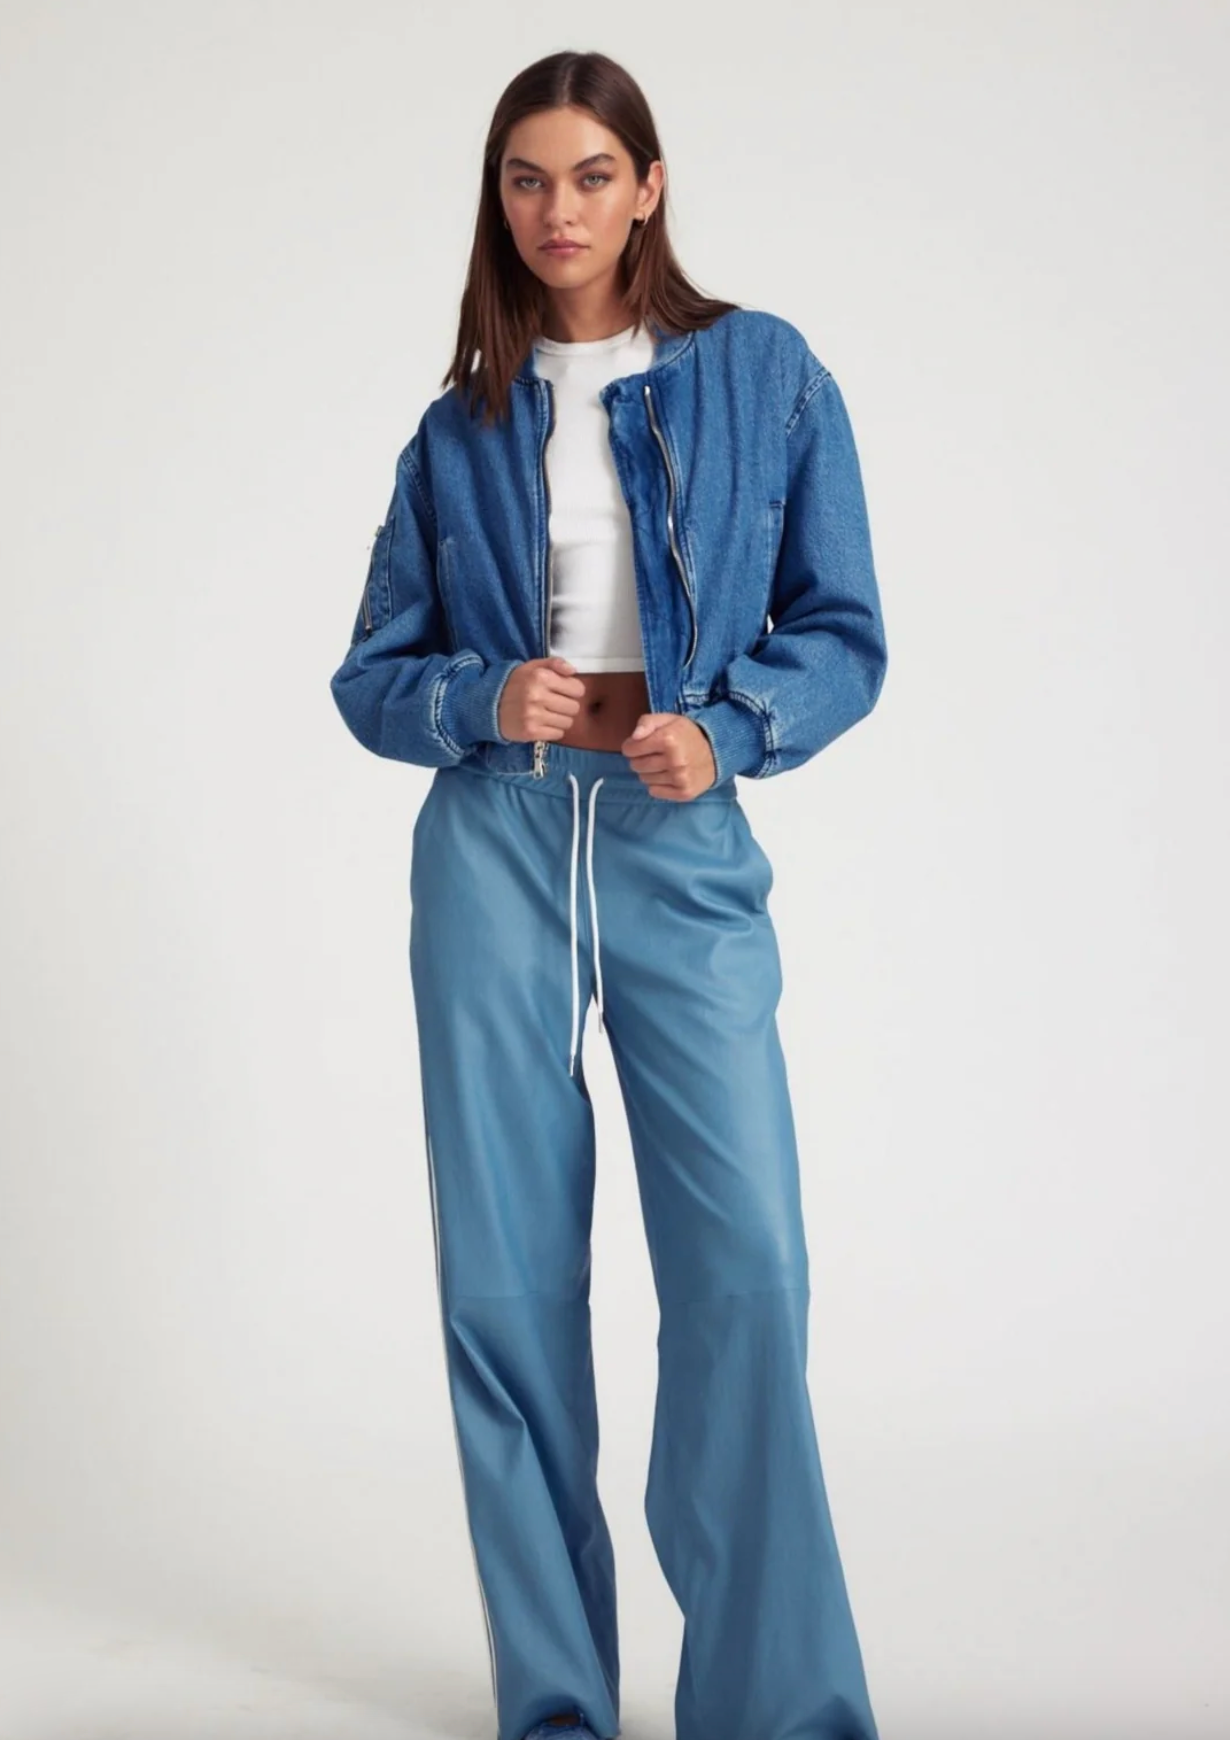 Chambray Blue Leather Athletic Drawstring Pants by SPRWMN